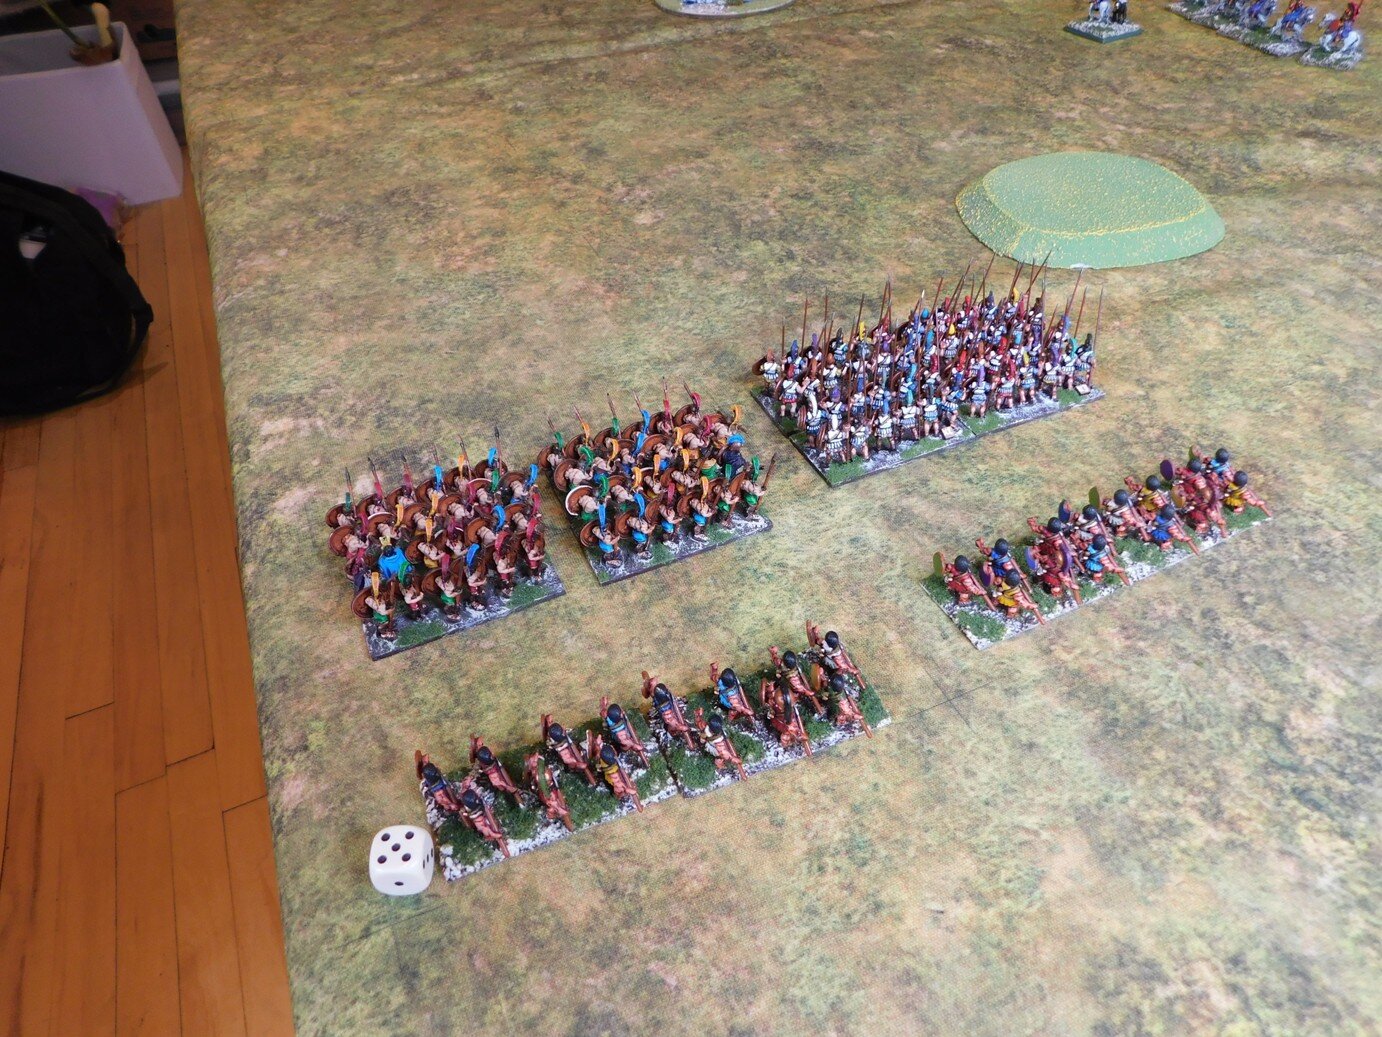 Two powerful Hoplite units, and their associated light infantry, face my battlecars